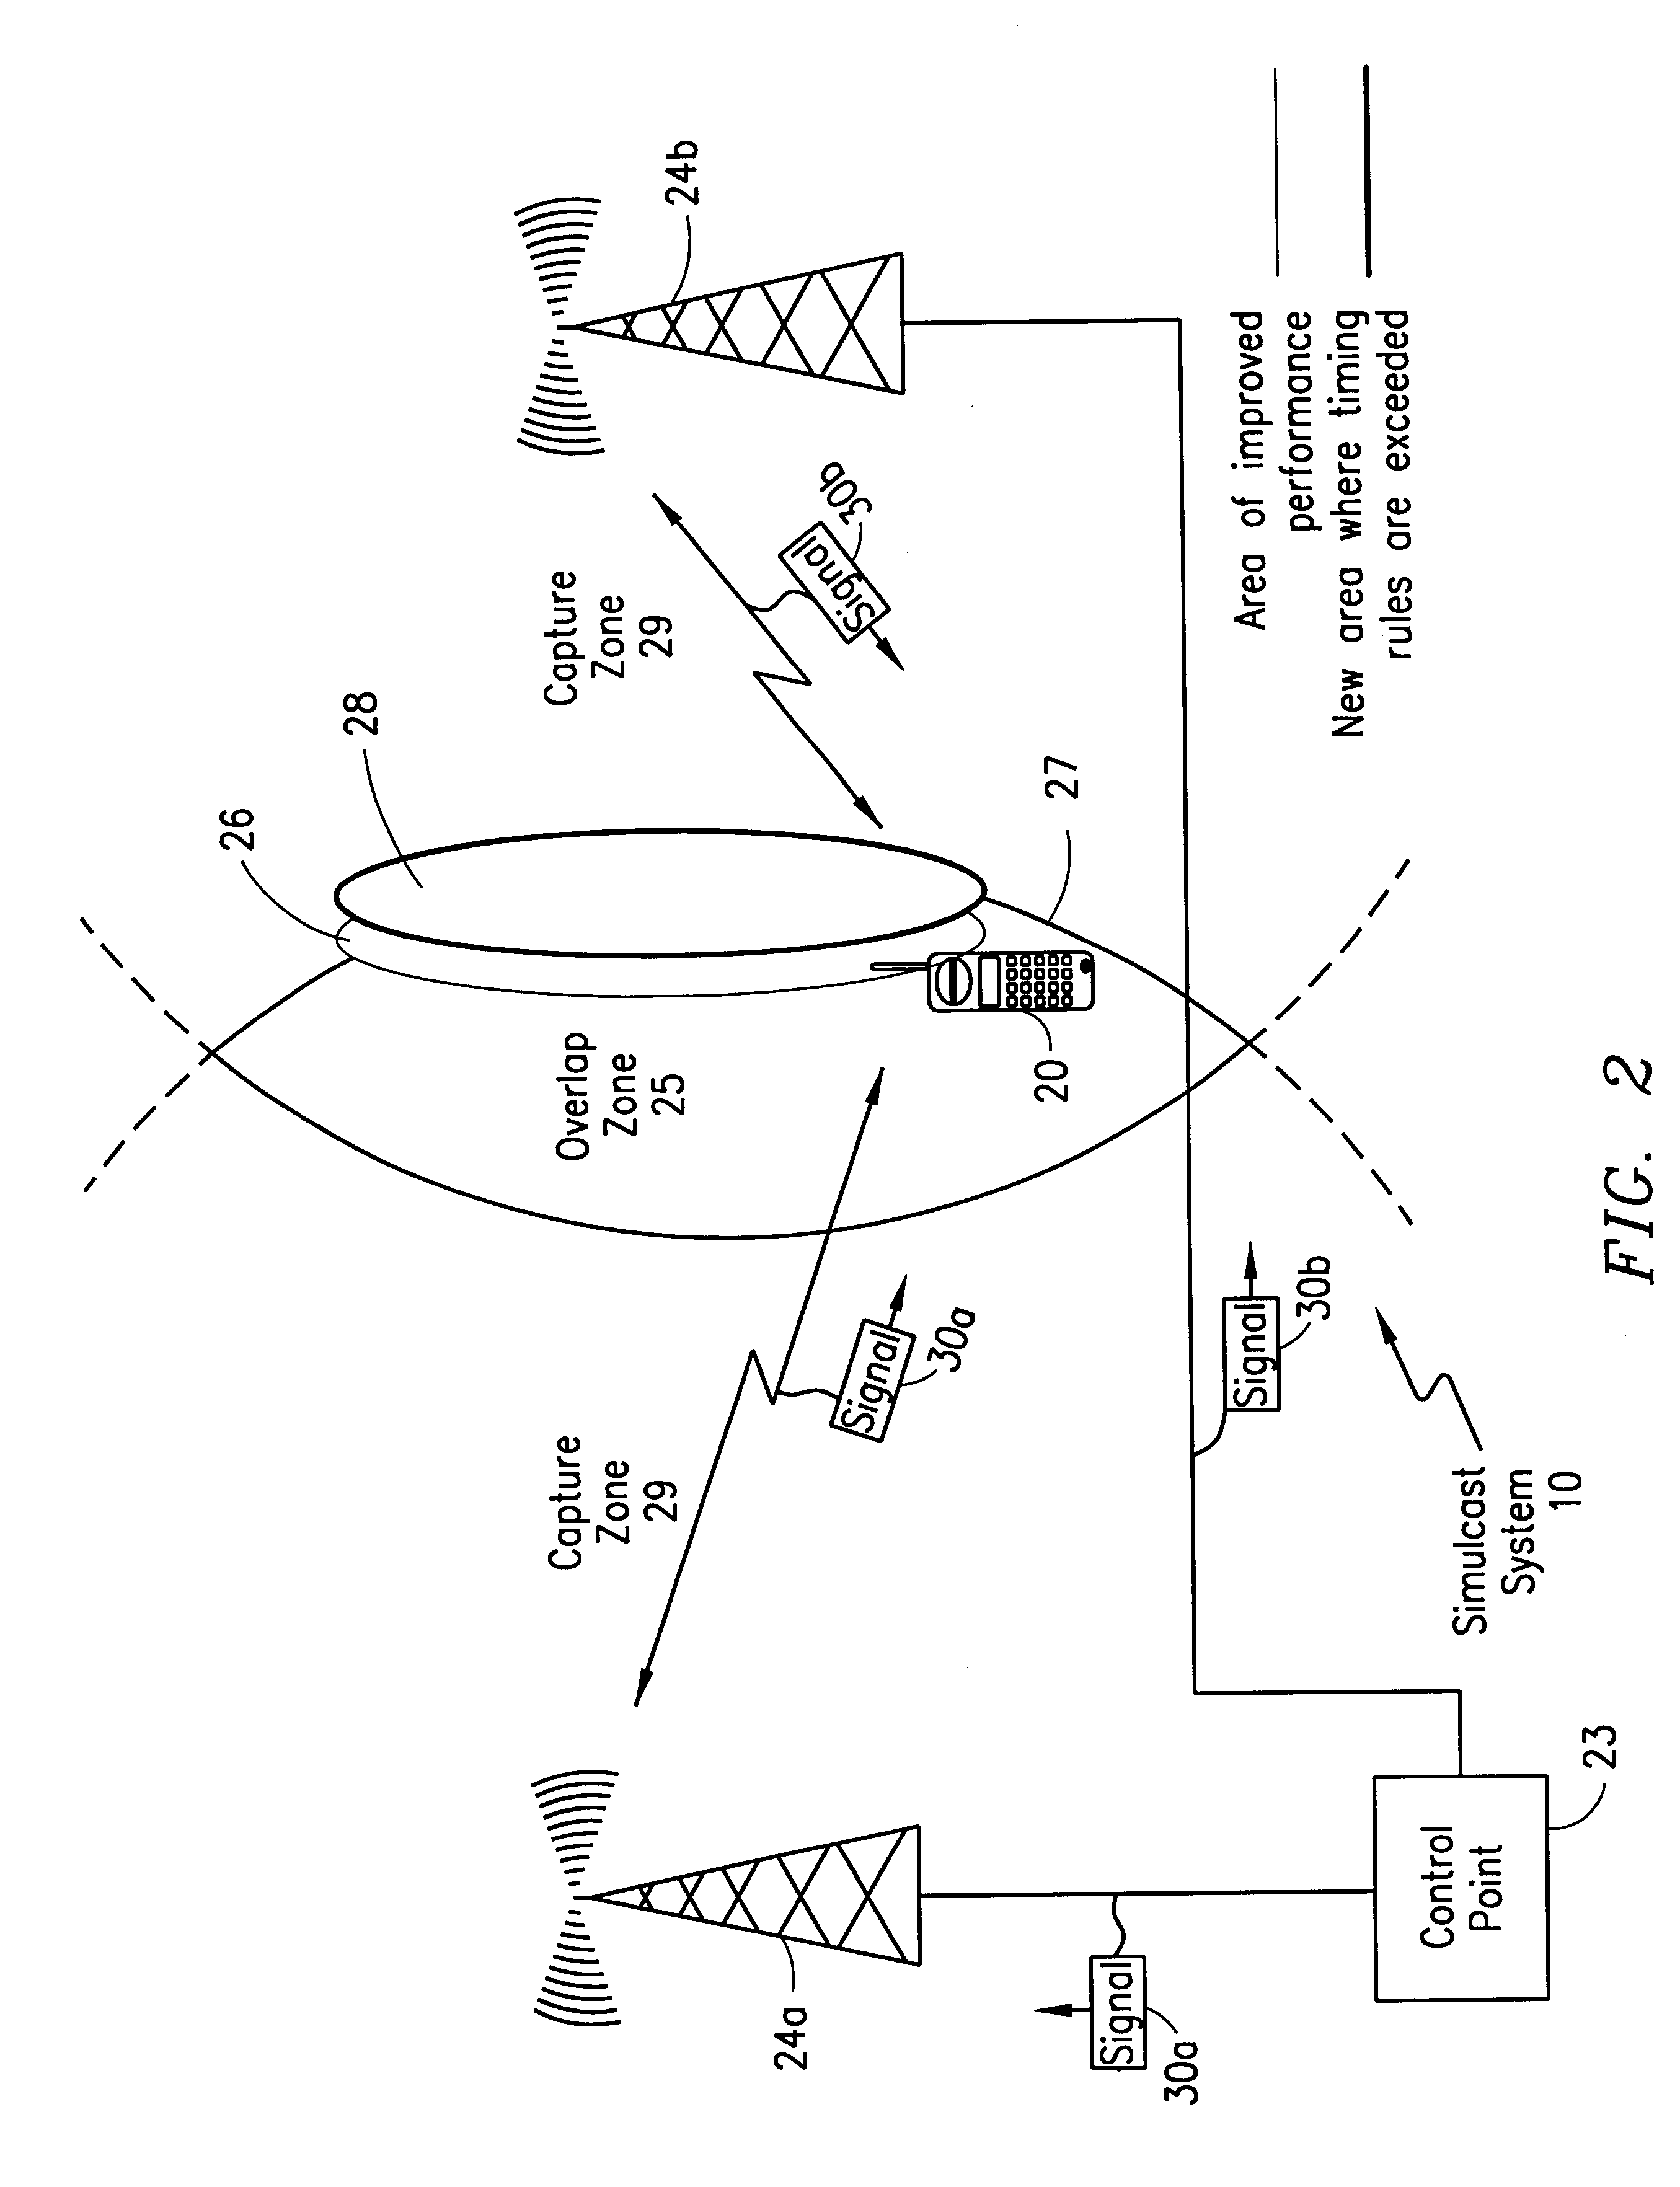 System and method for dynamic overlap compensation in a simulcast network